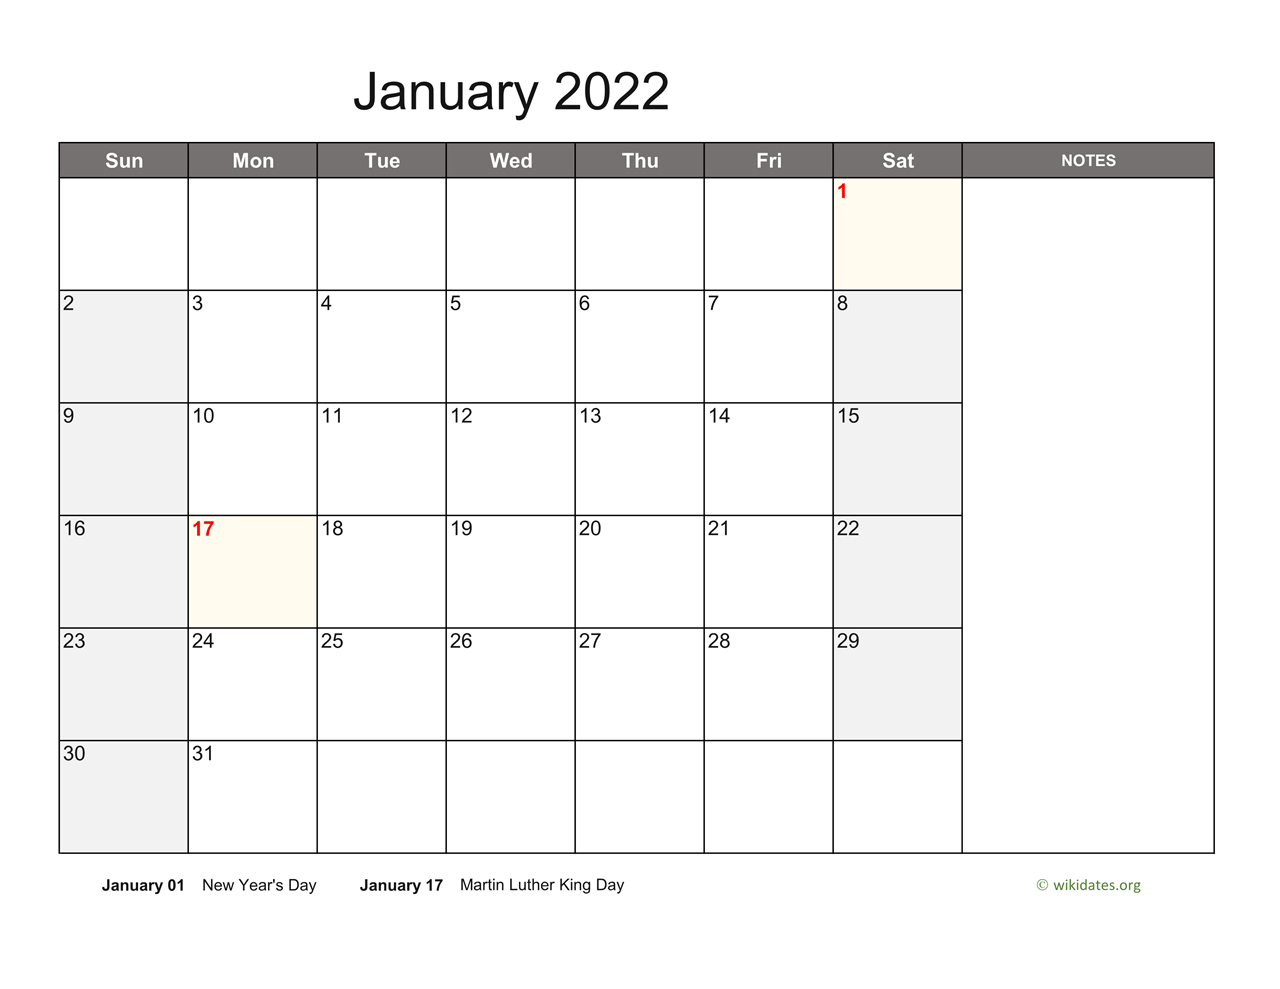 January 2022 Calendar With Notes Wikidates Org